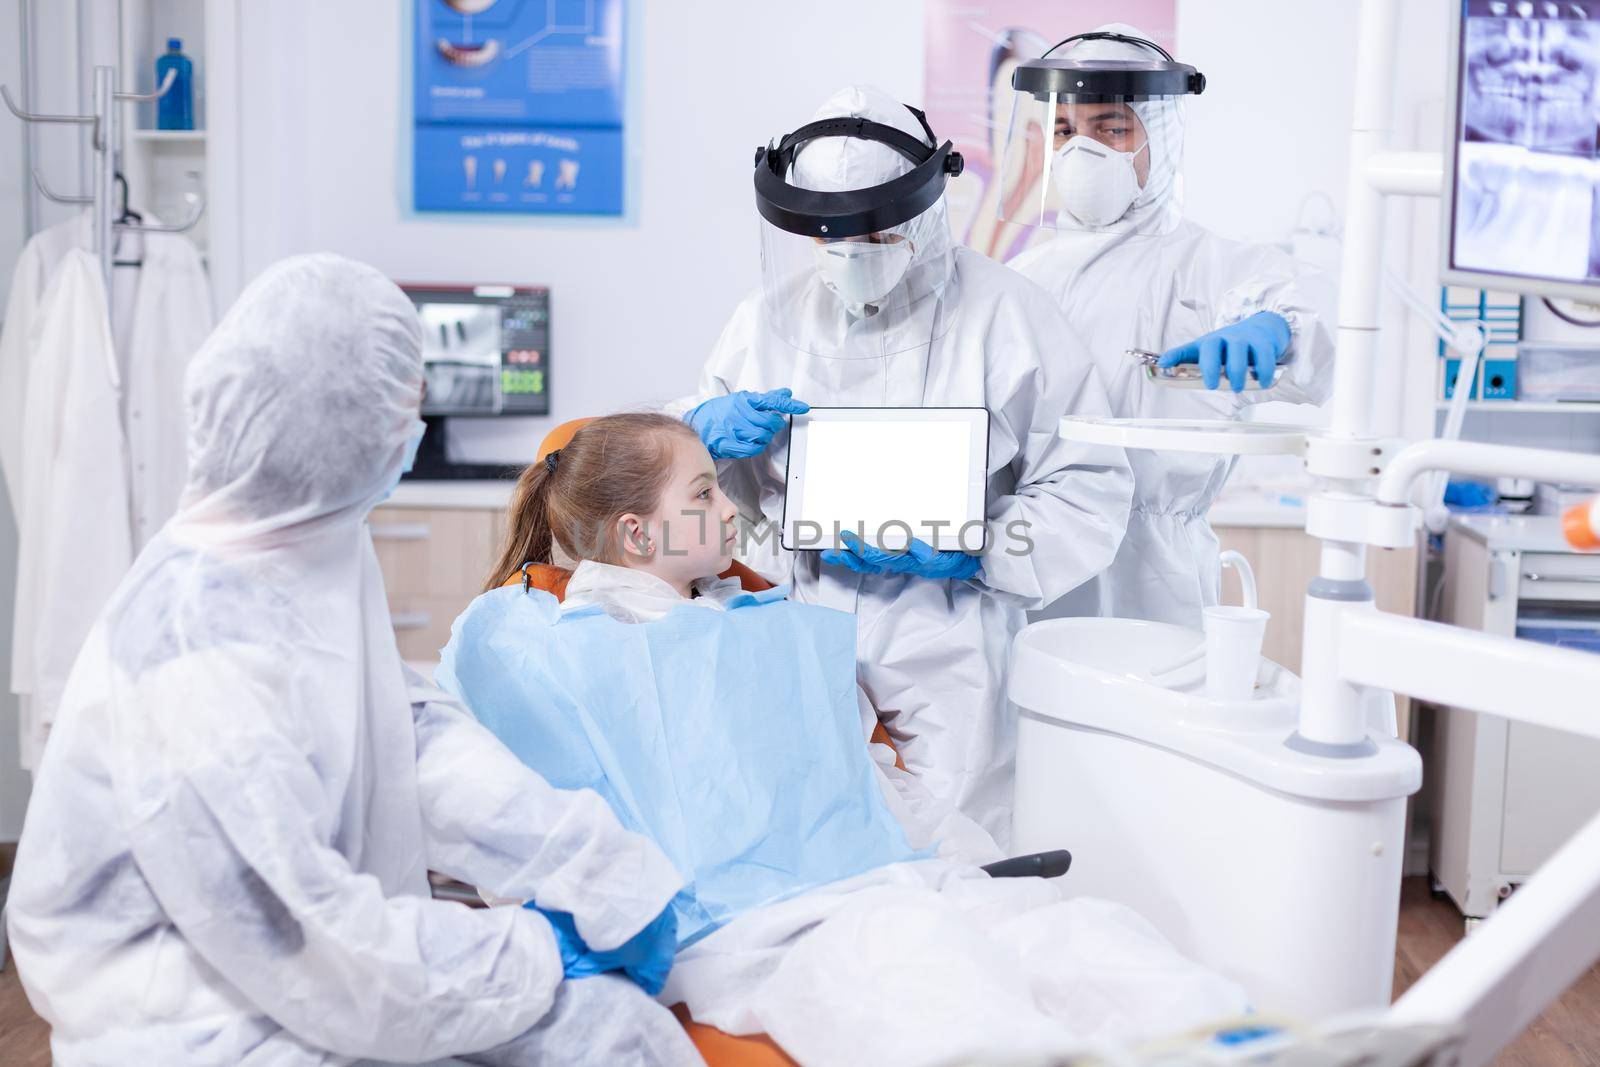 Dentist dressed in ppe suit using digital device by DCStudio